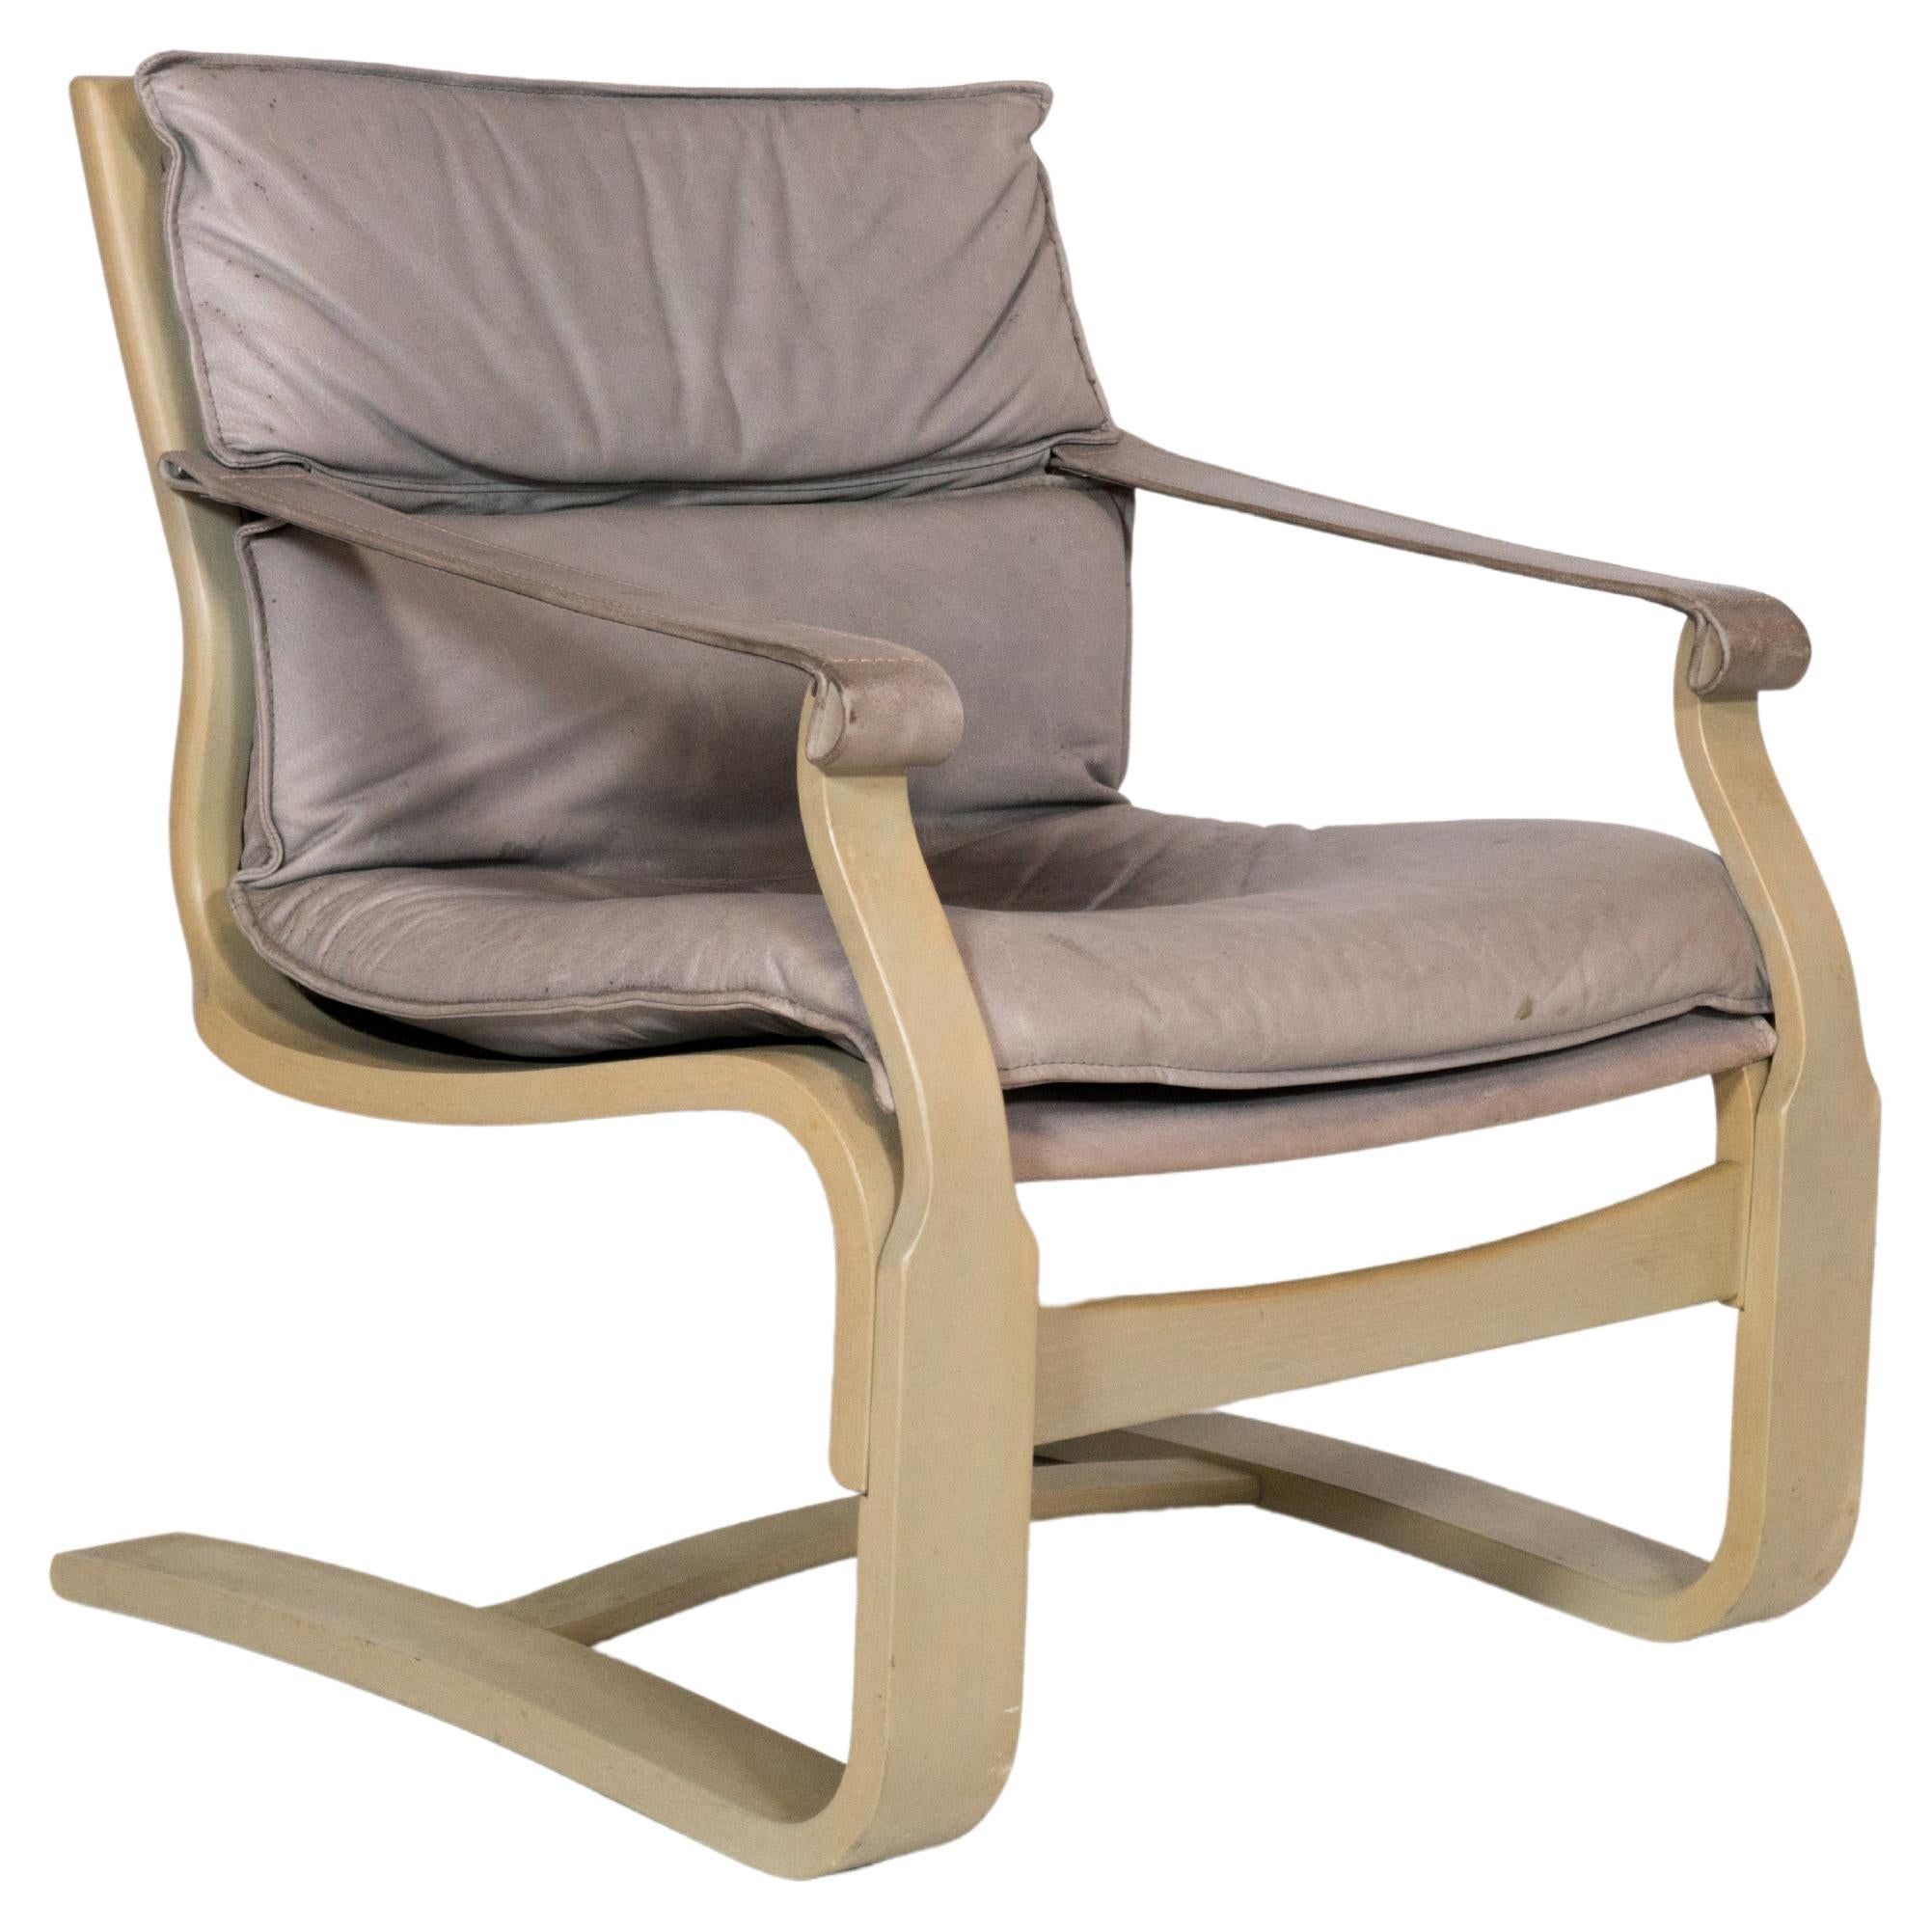 1970s Ake Fribytter Bentwood and Leather Lounge Chair for Nelo